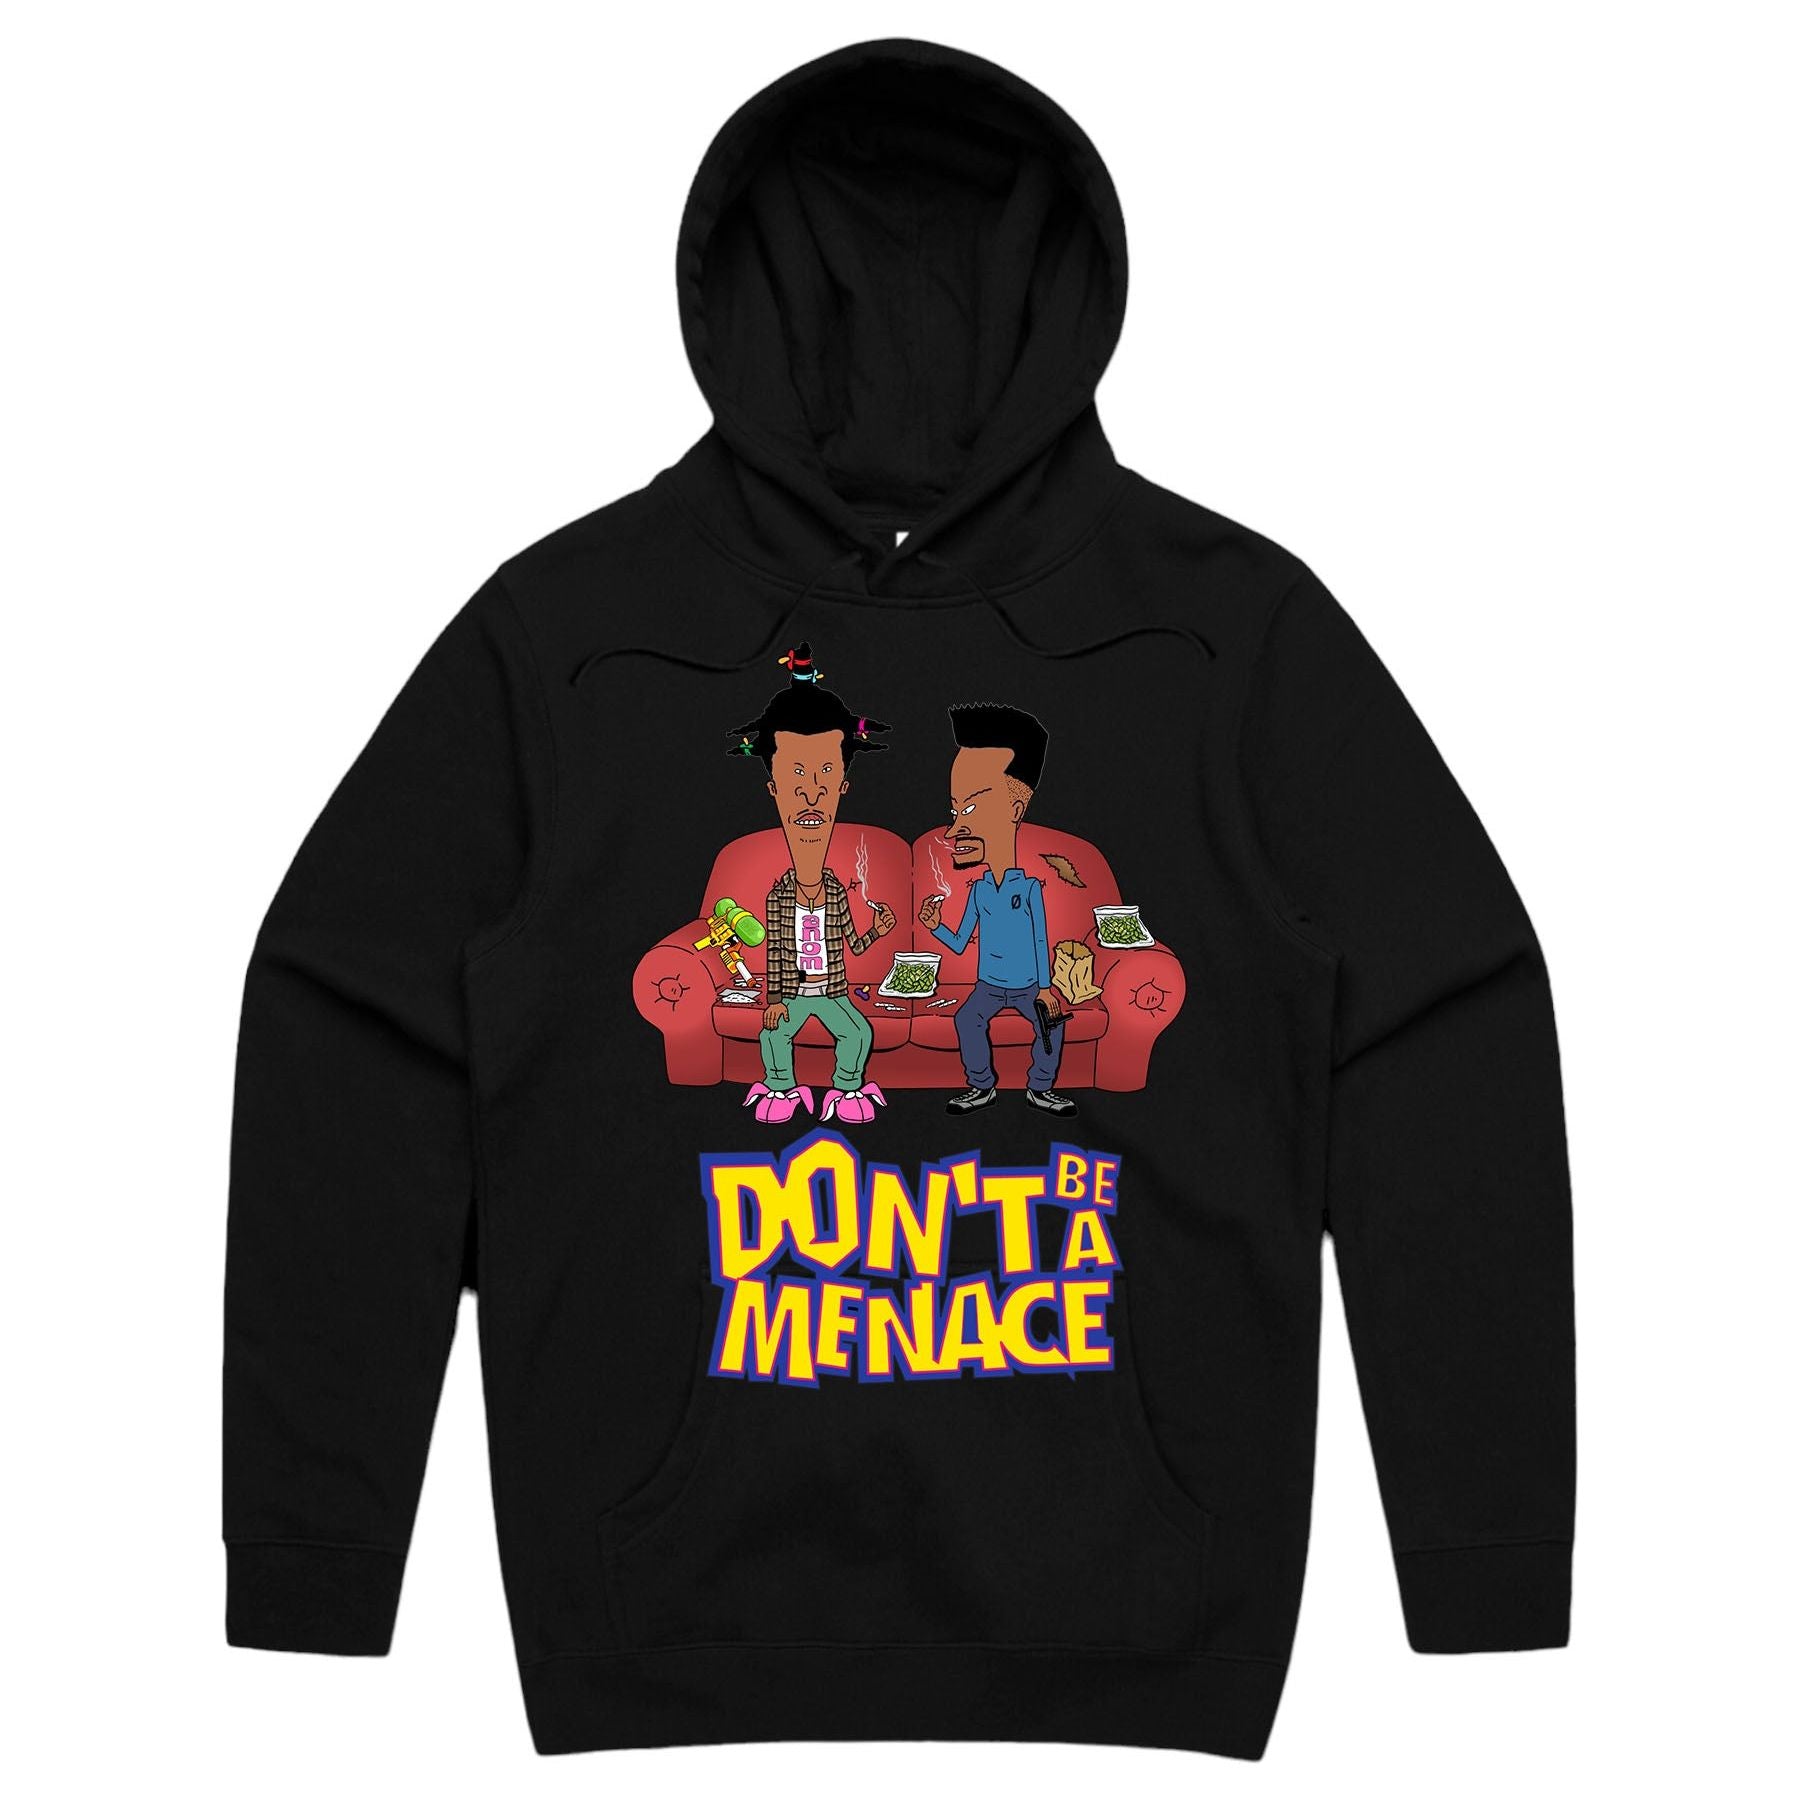 DON’T BE A MENACE-HOODIE